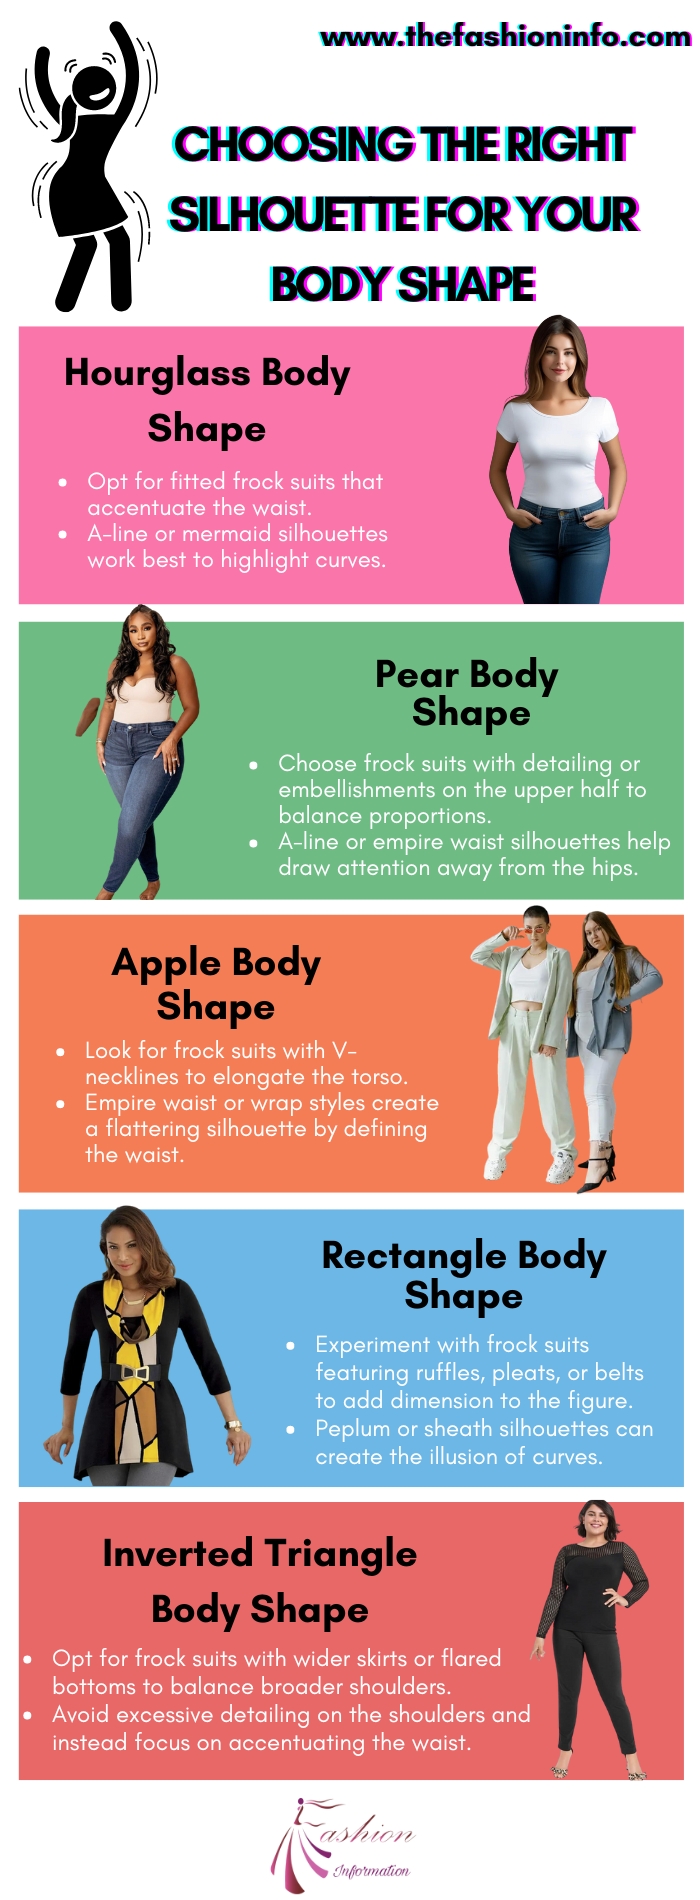 Choosing the Right Silhouette for Your Body Shape